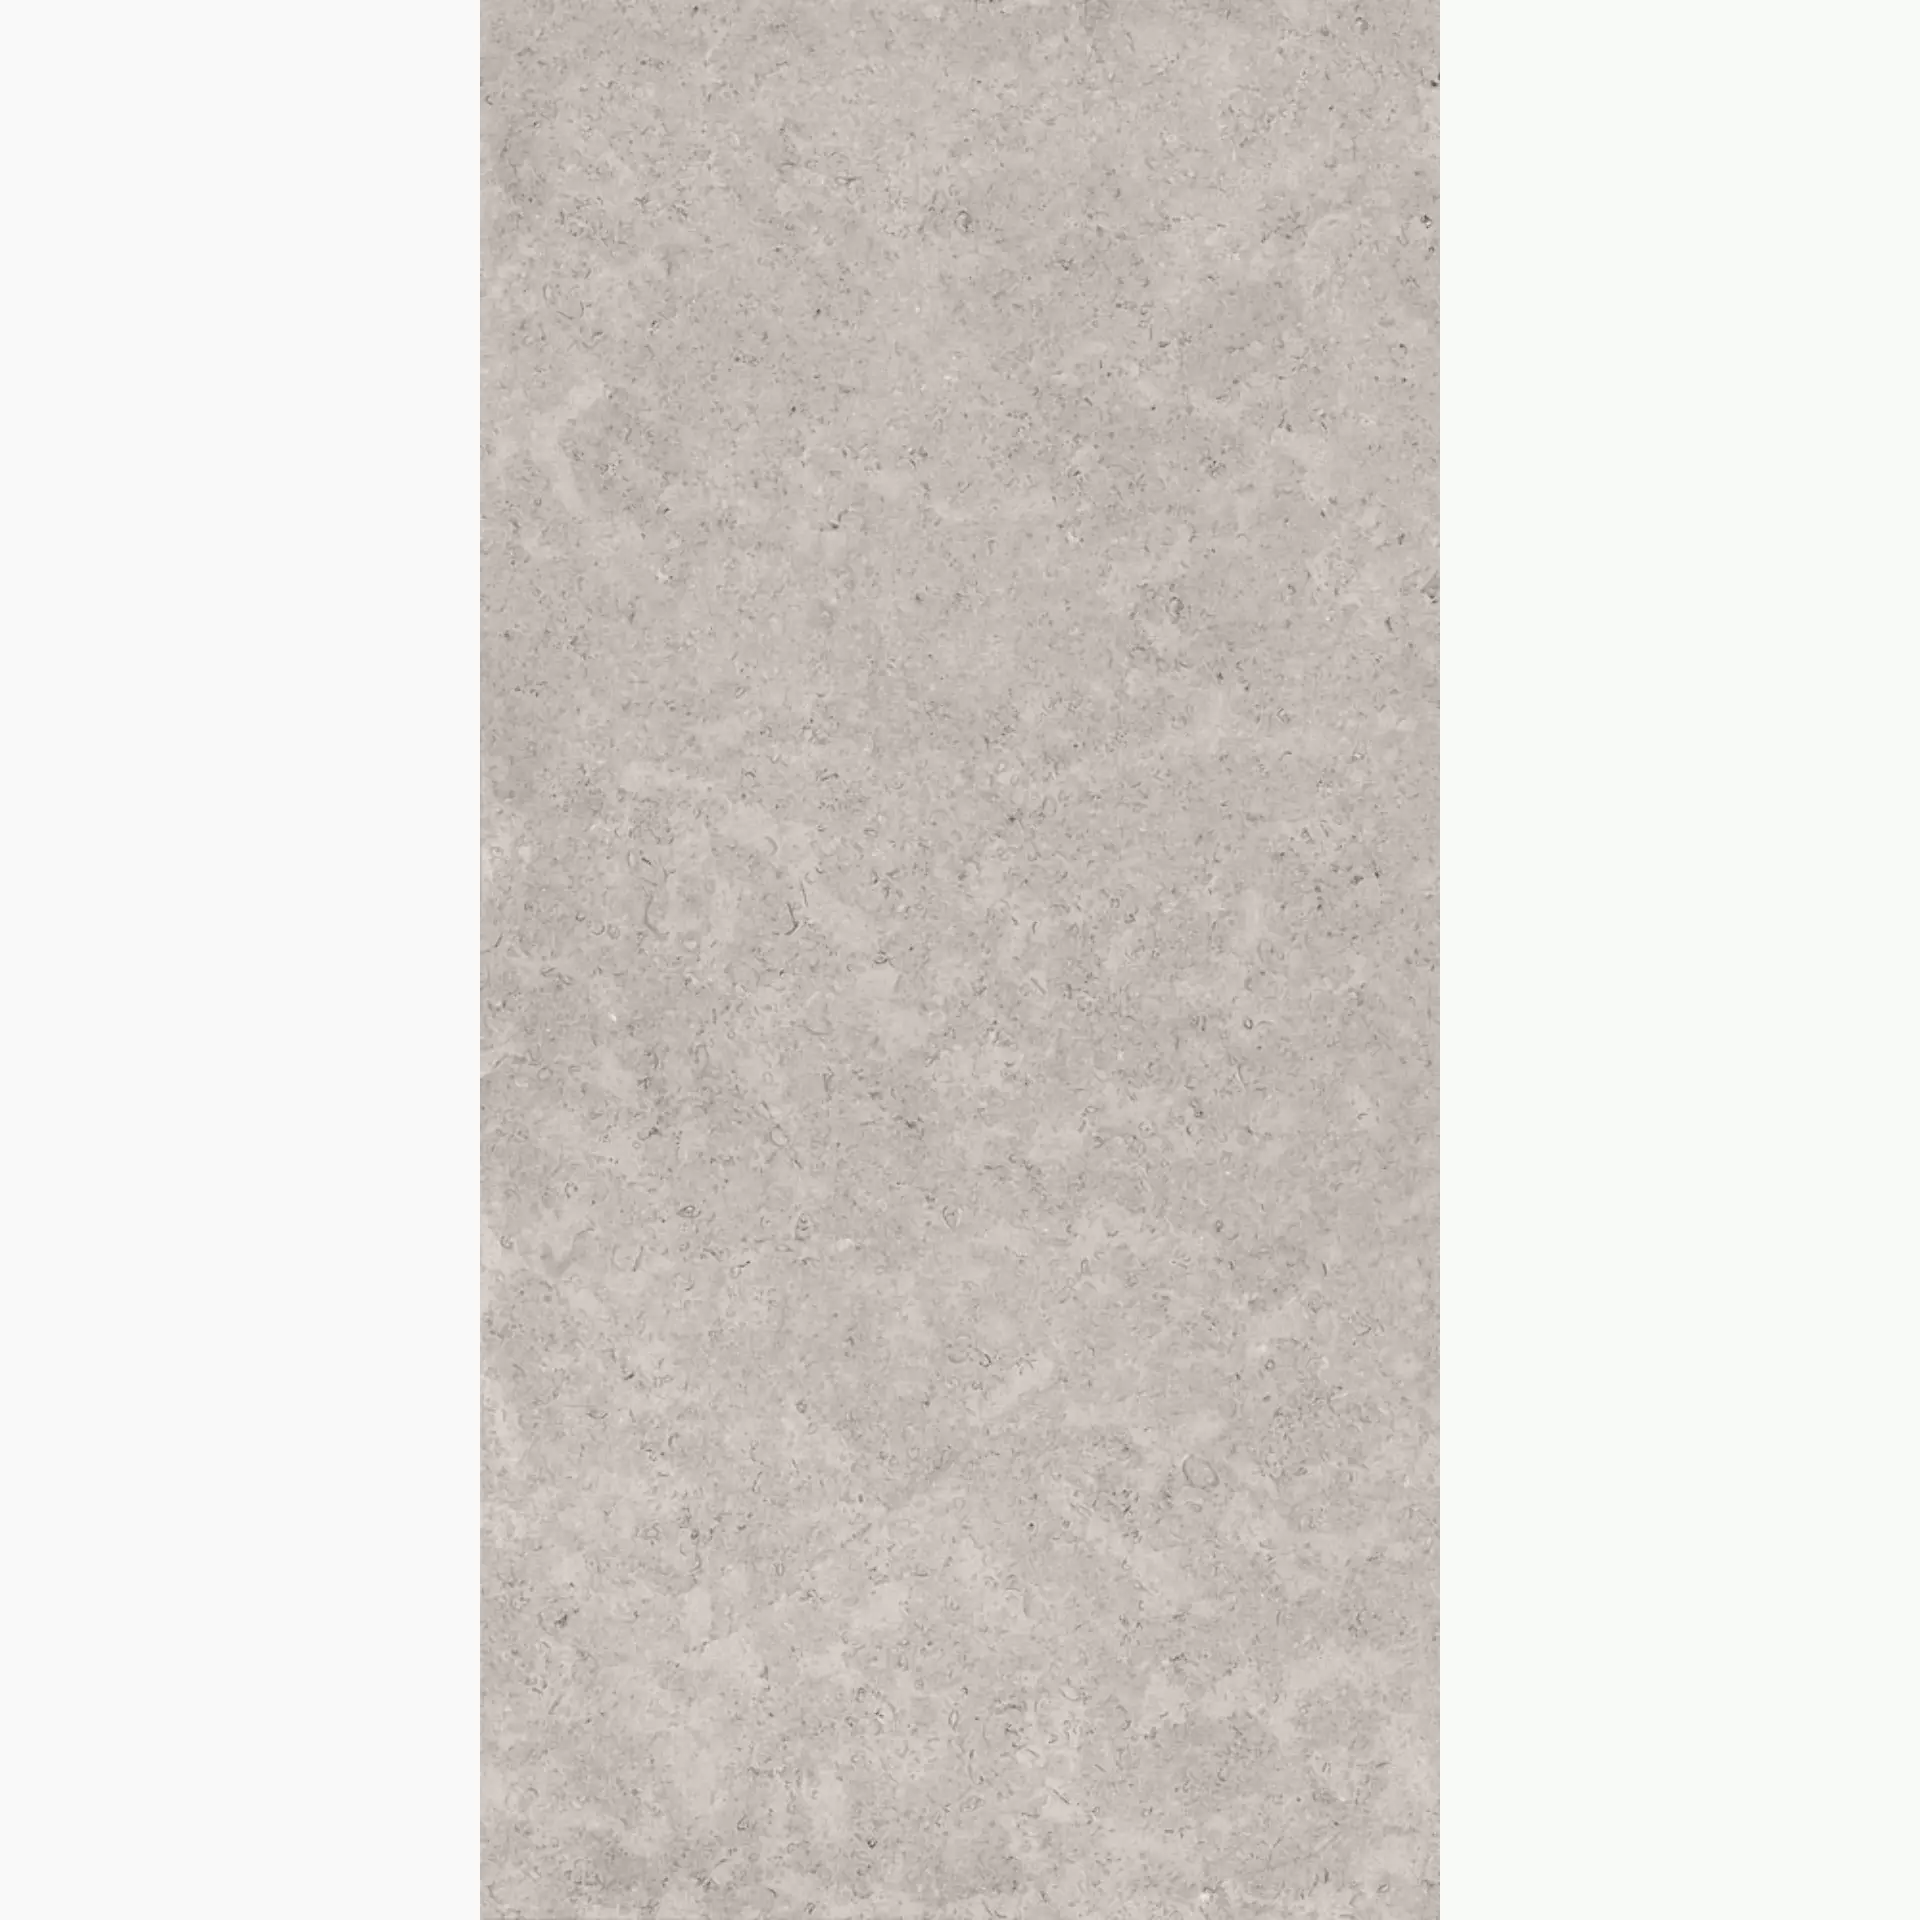 Sant Agostino Unionstone 2 Cedre Grey Natural CSACEDGR60 60x120cm rectified 10mm